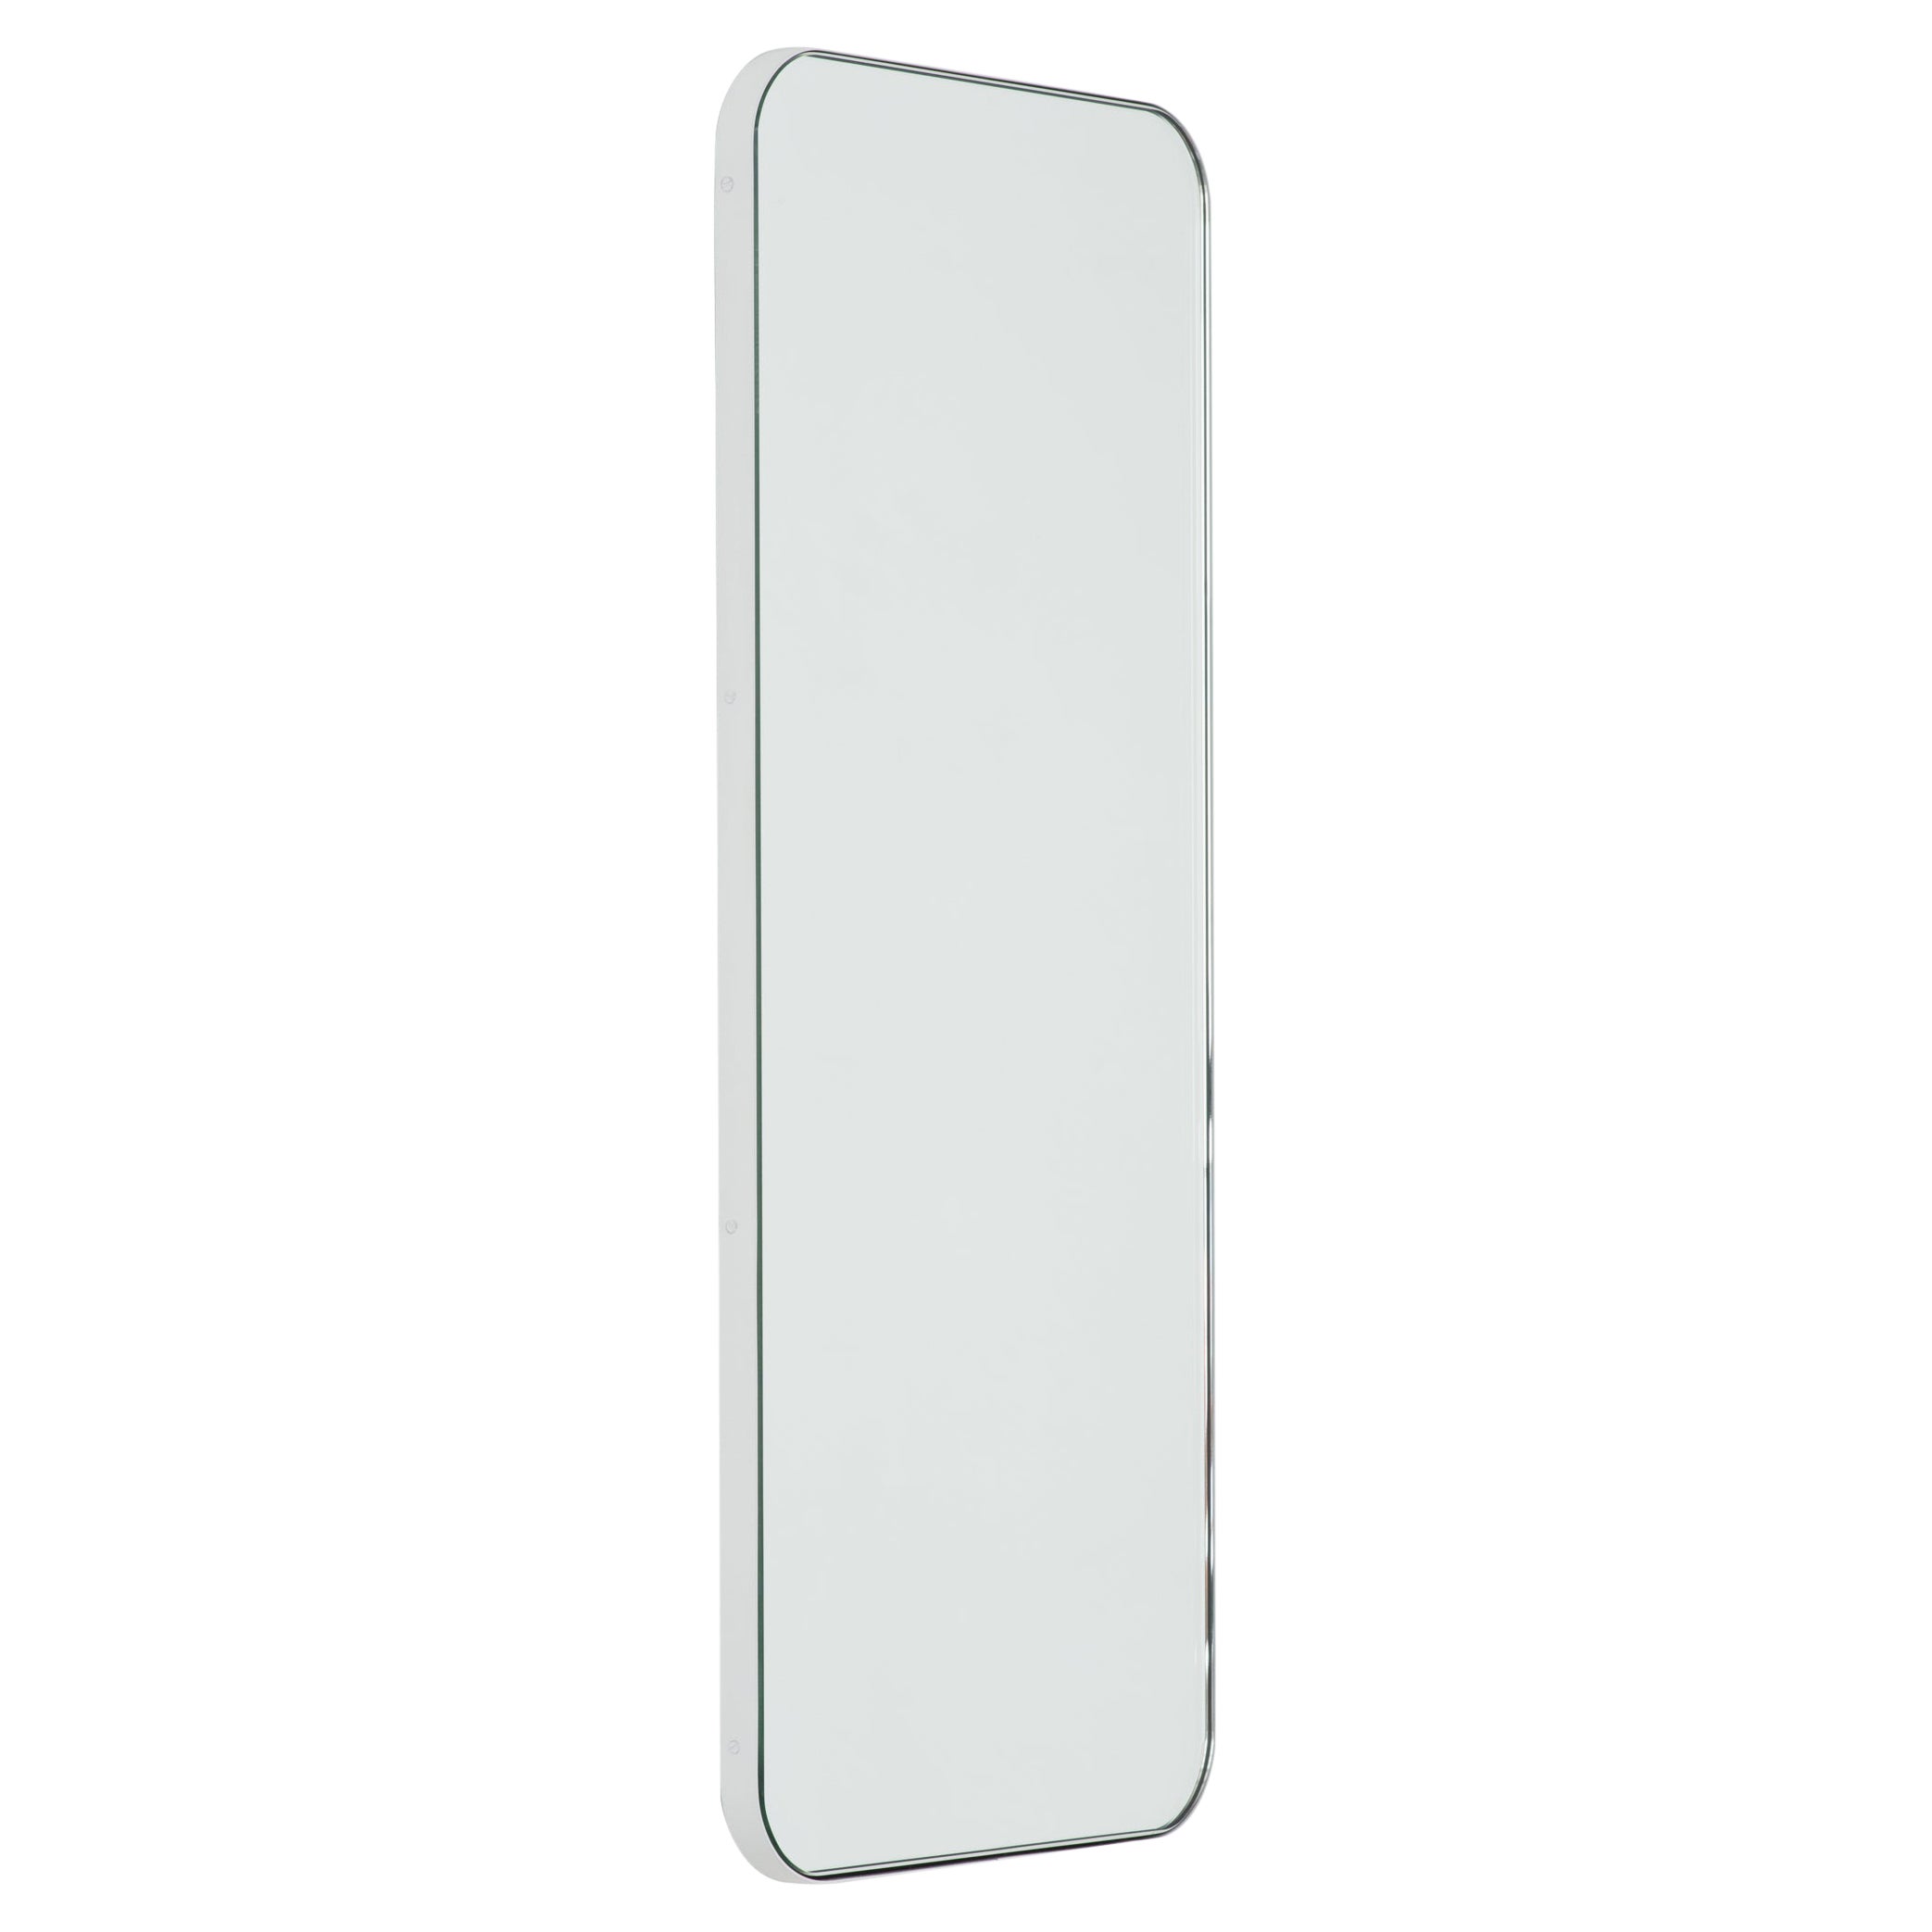 Quadris Rectangular Modern Mirror with a White Frame, Small For Sale